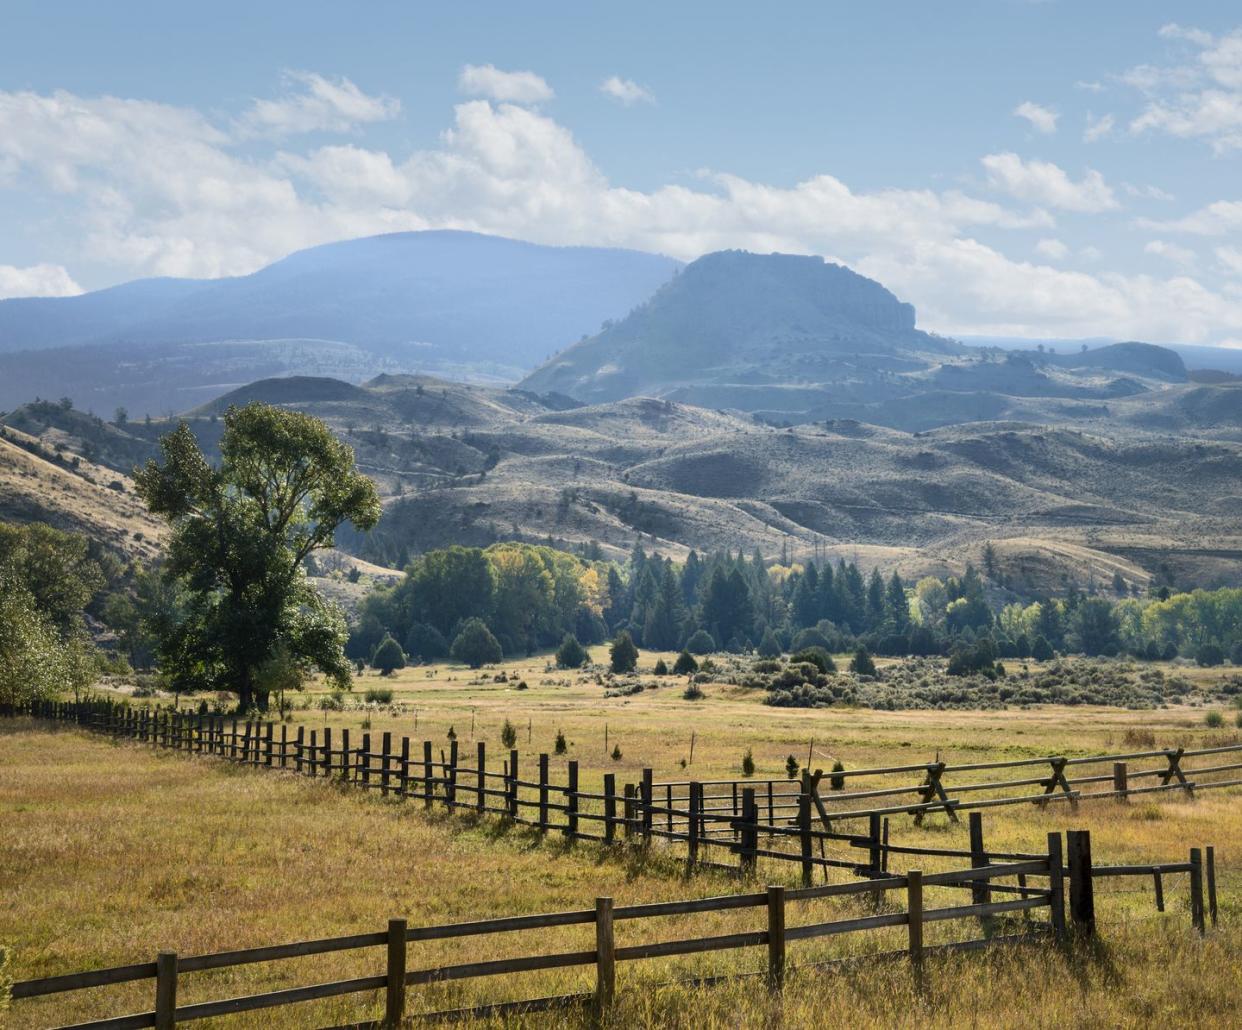 western ranch, fences and mountains